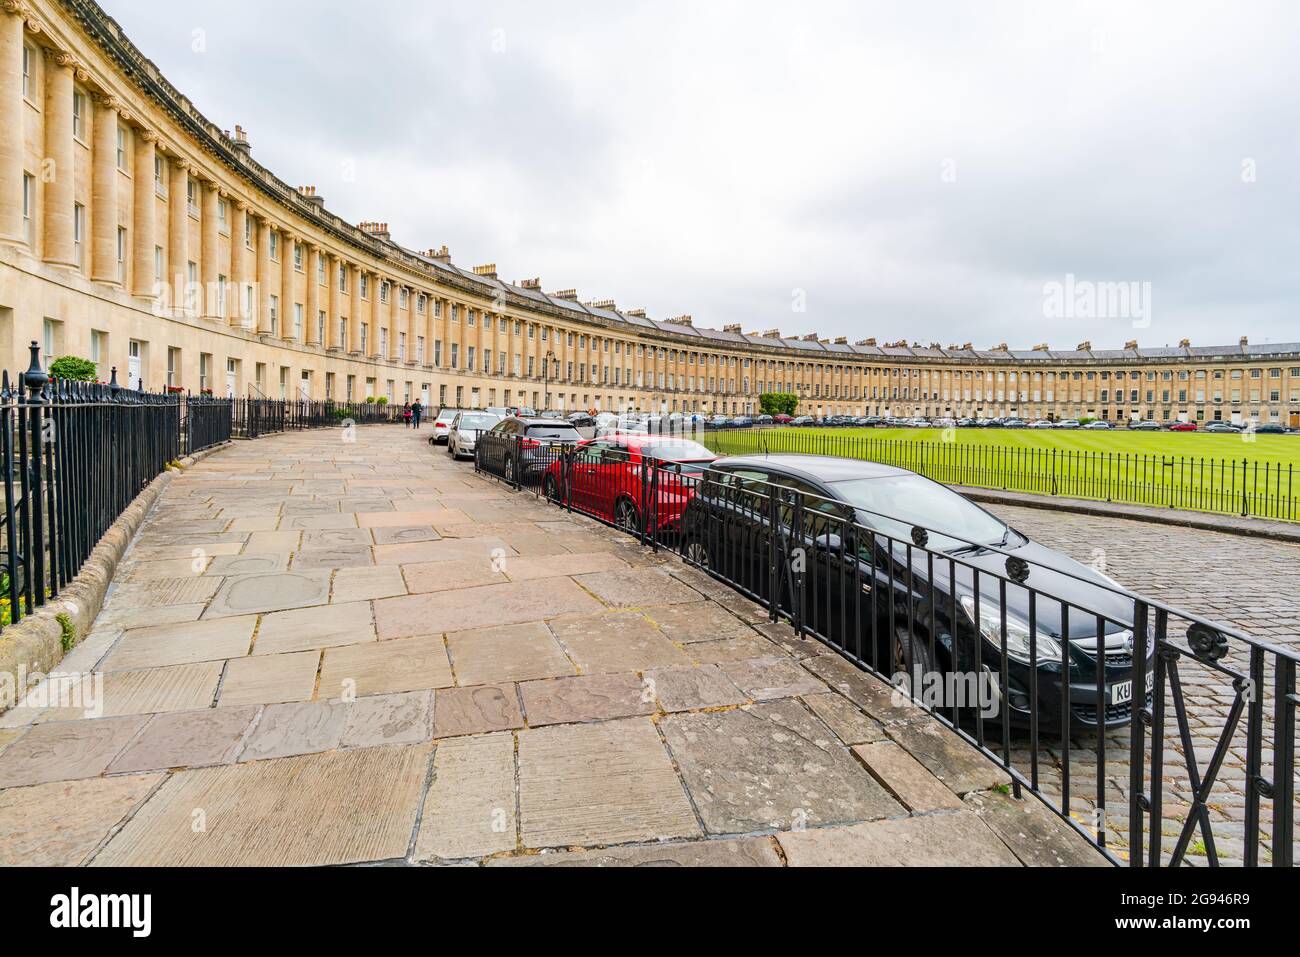 BATH, UK - JUNE 27, 2021: View of Royal Crescent in Bath, overlooking Royal Victoria Park Stock Photo